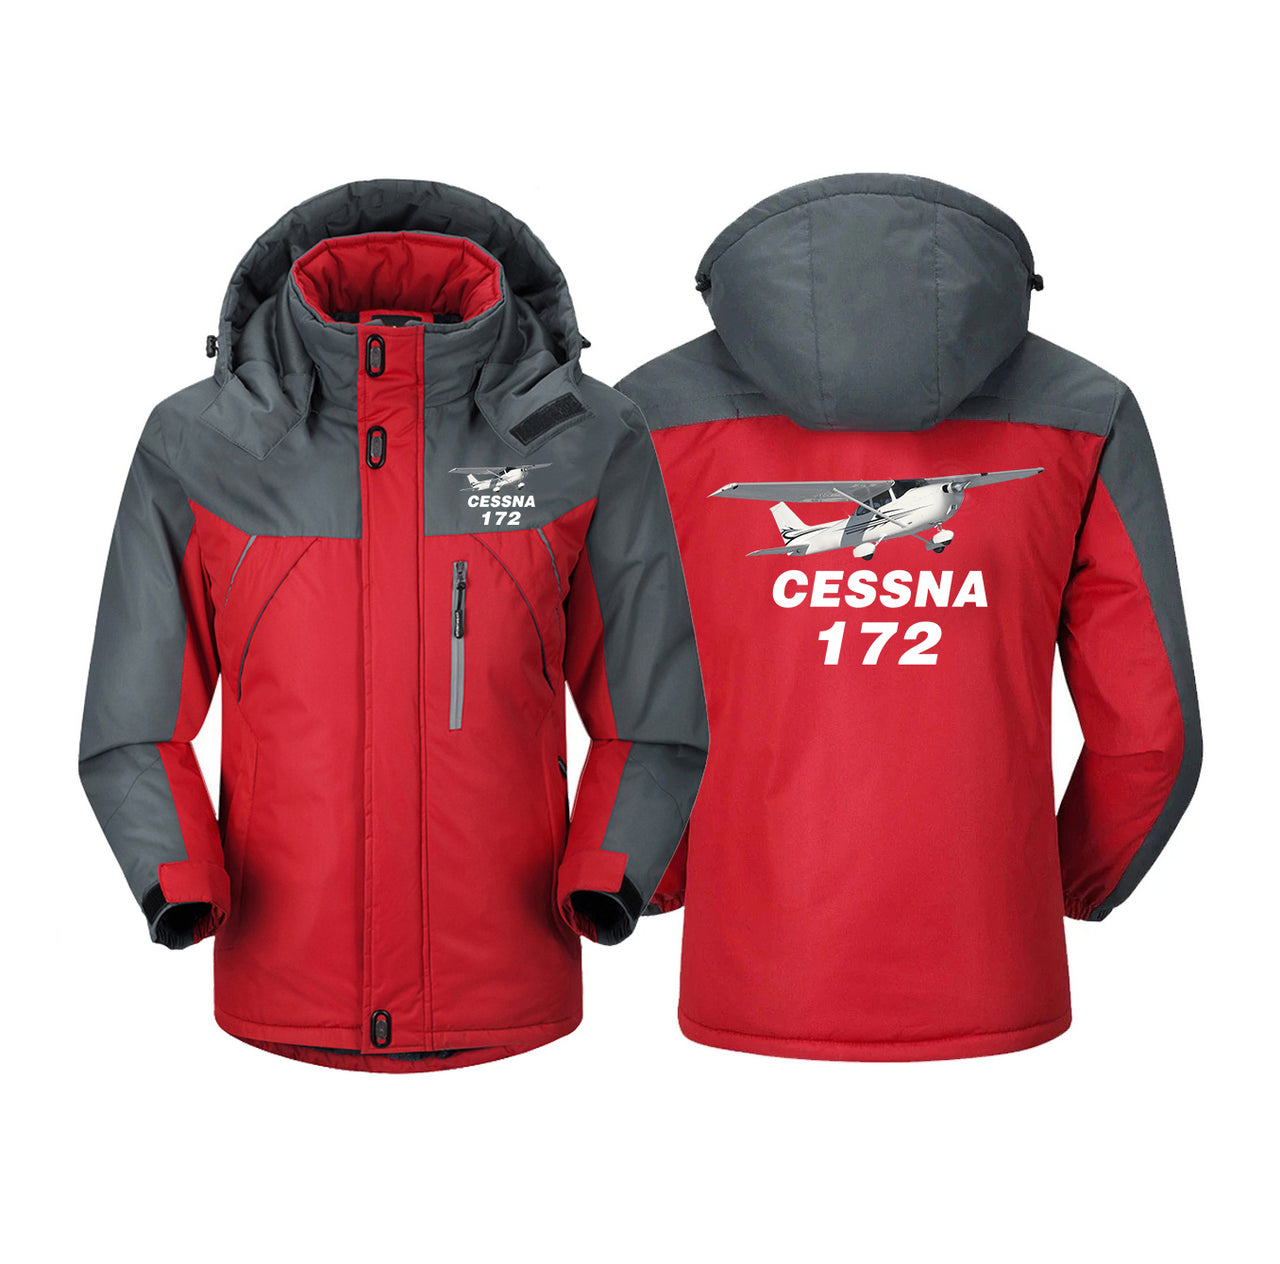 The Cessna 172 Designed Thick Winter Jackets